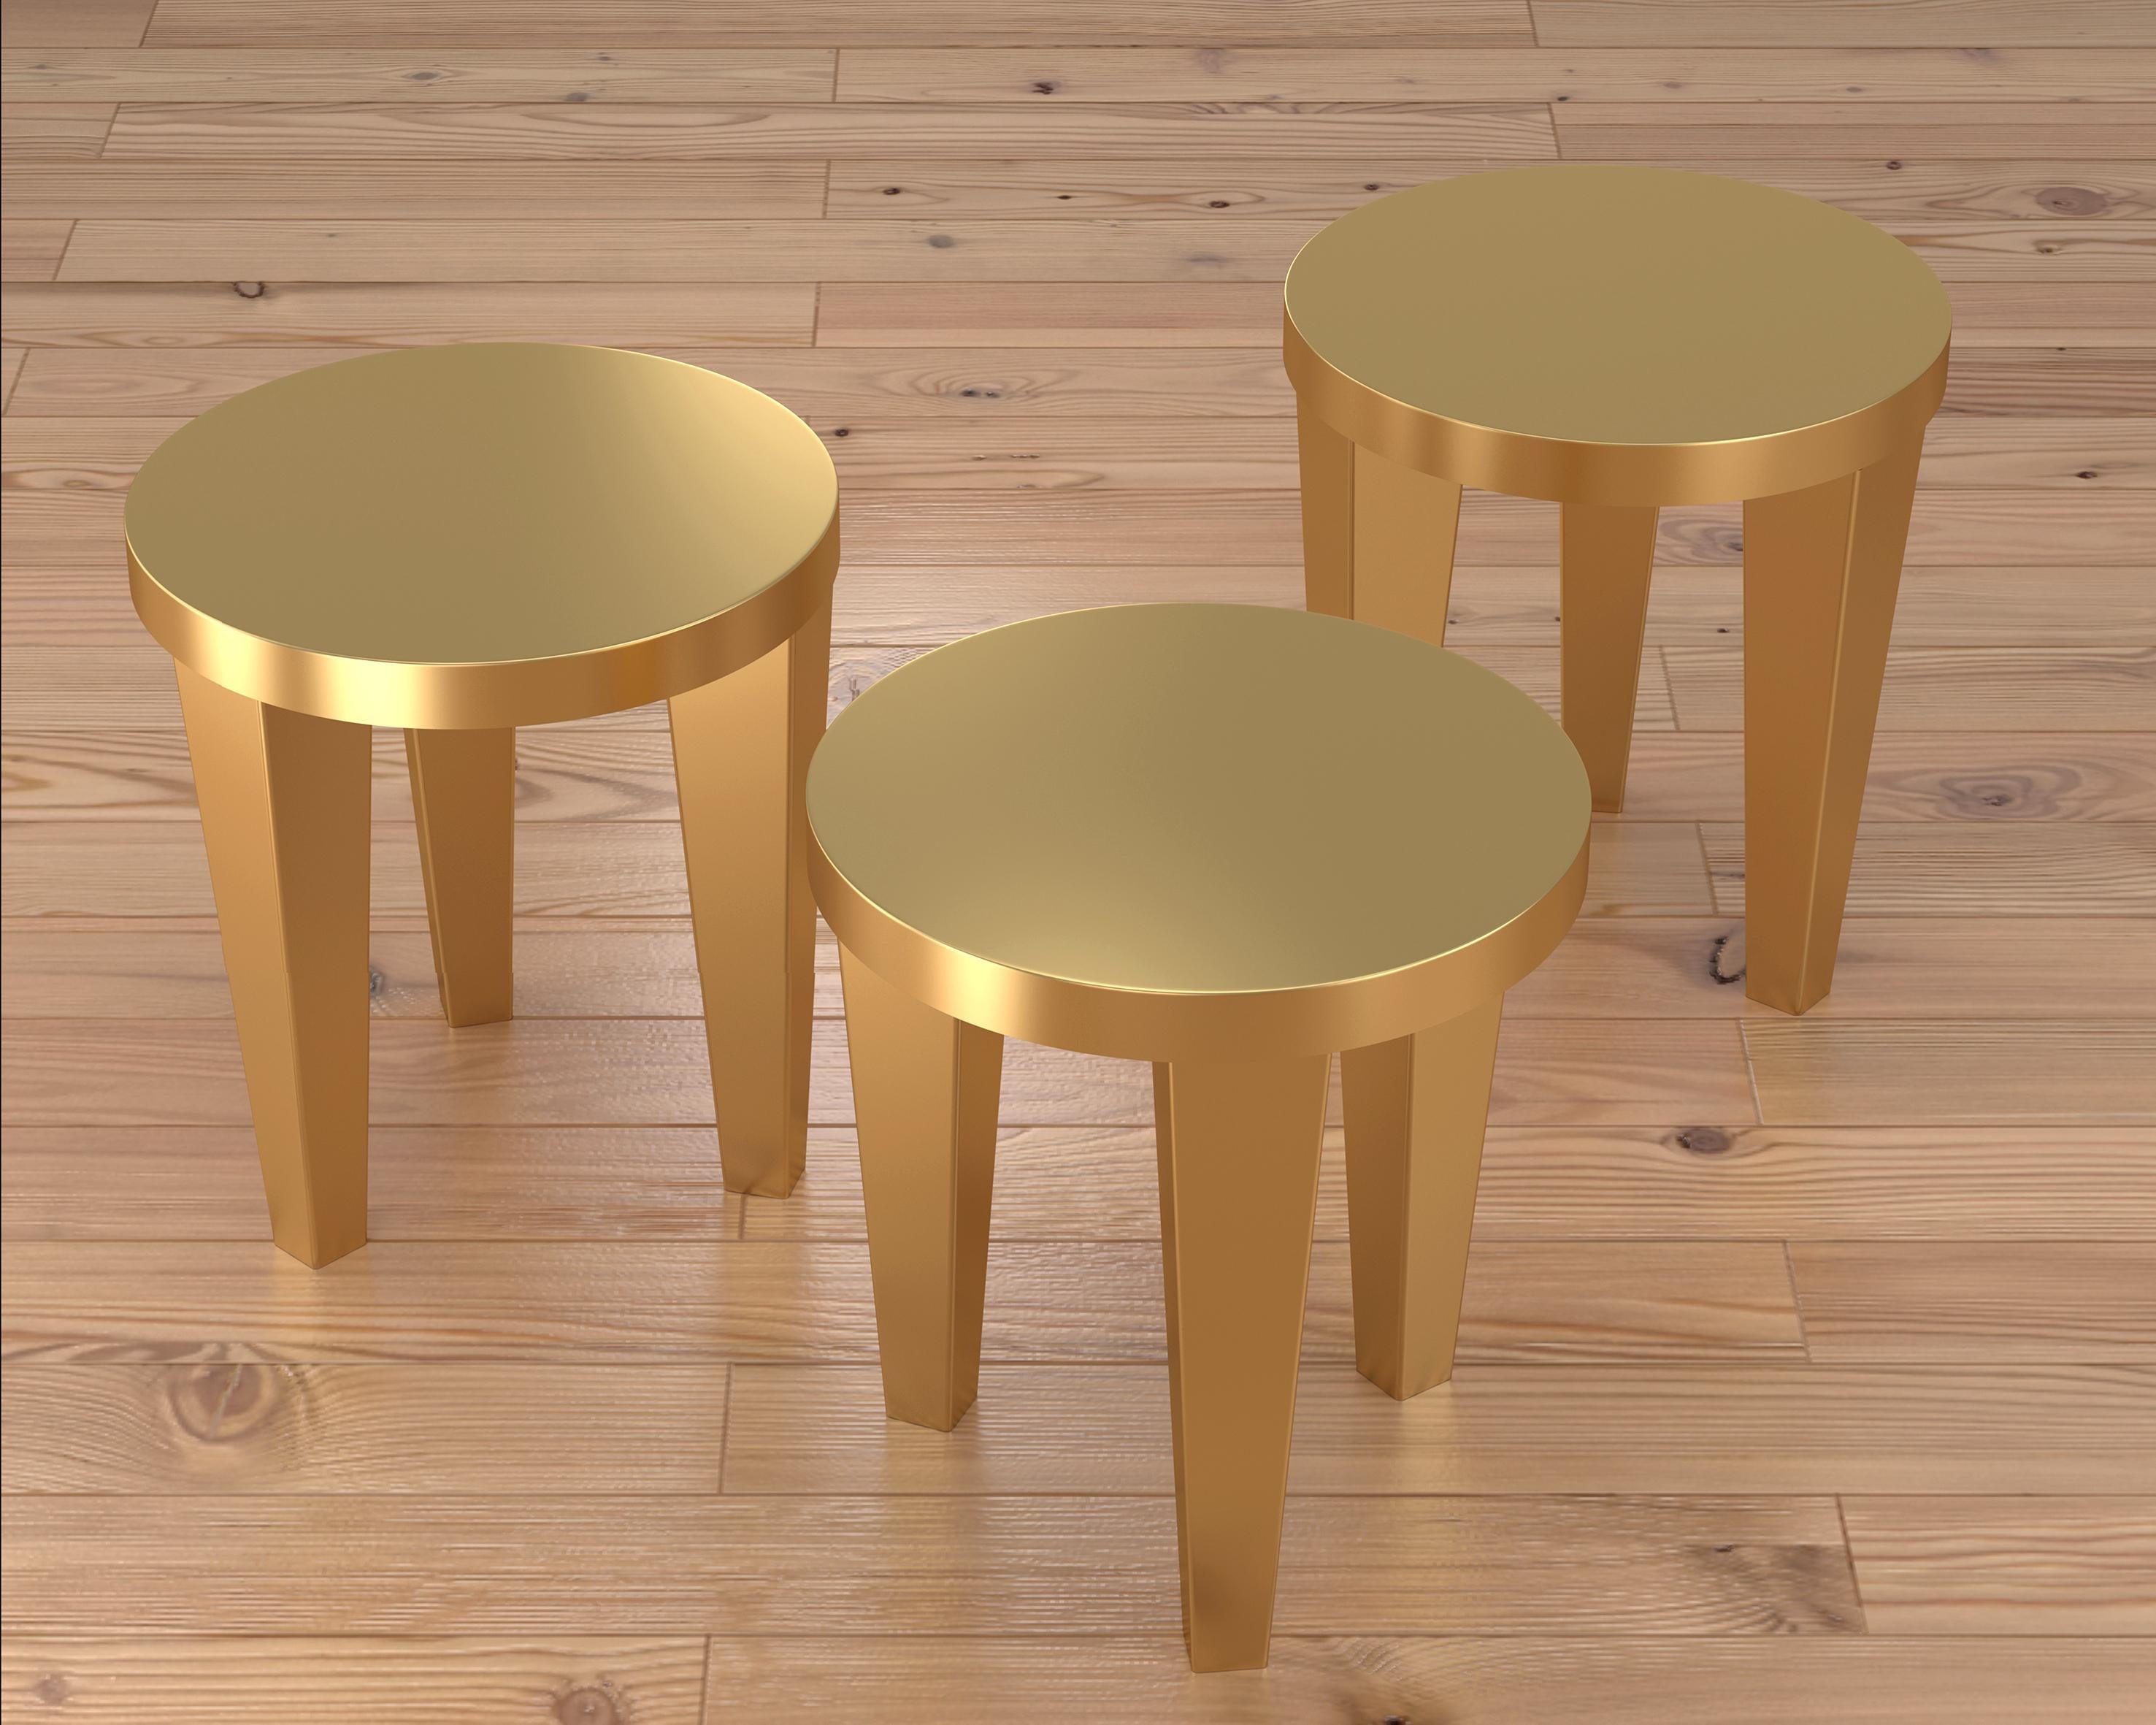 Lacquered Contemporary Stool Rose Gold Bob Aluminium by Chapel Petrassi For Sale